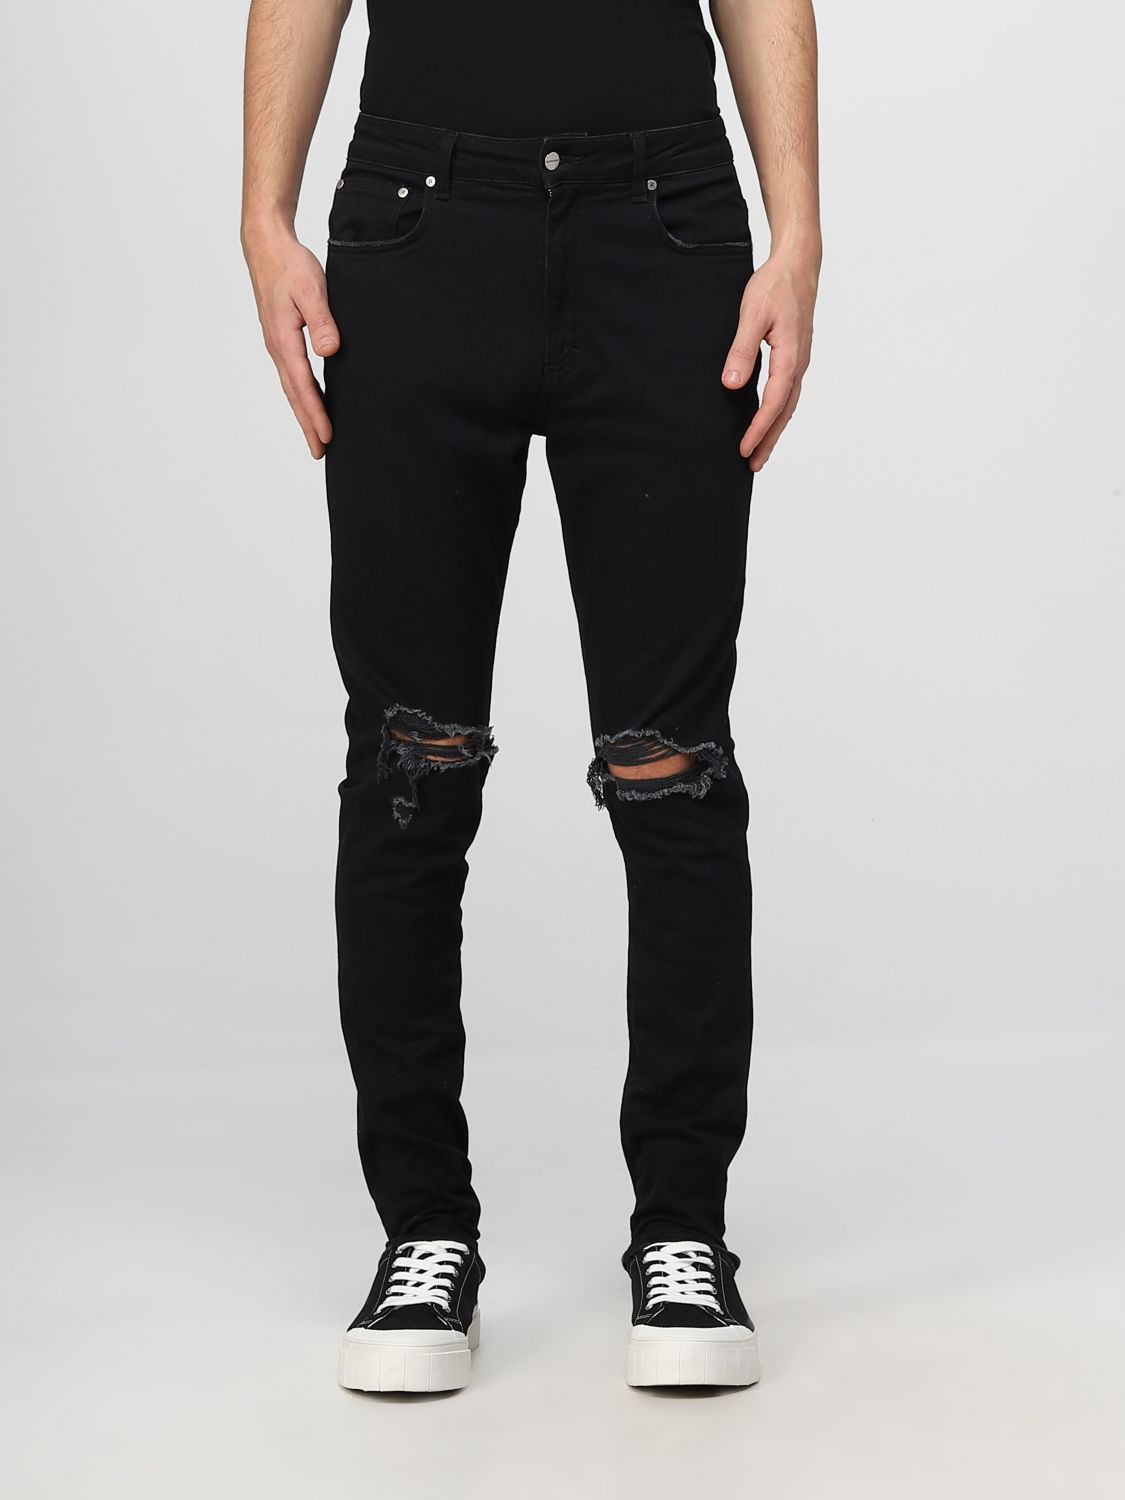 Represent Outlet: jeans for man - Black | Represent jeans M07044 online ...